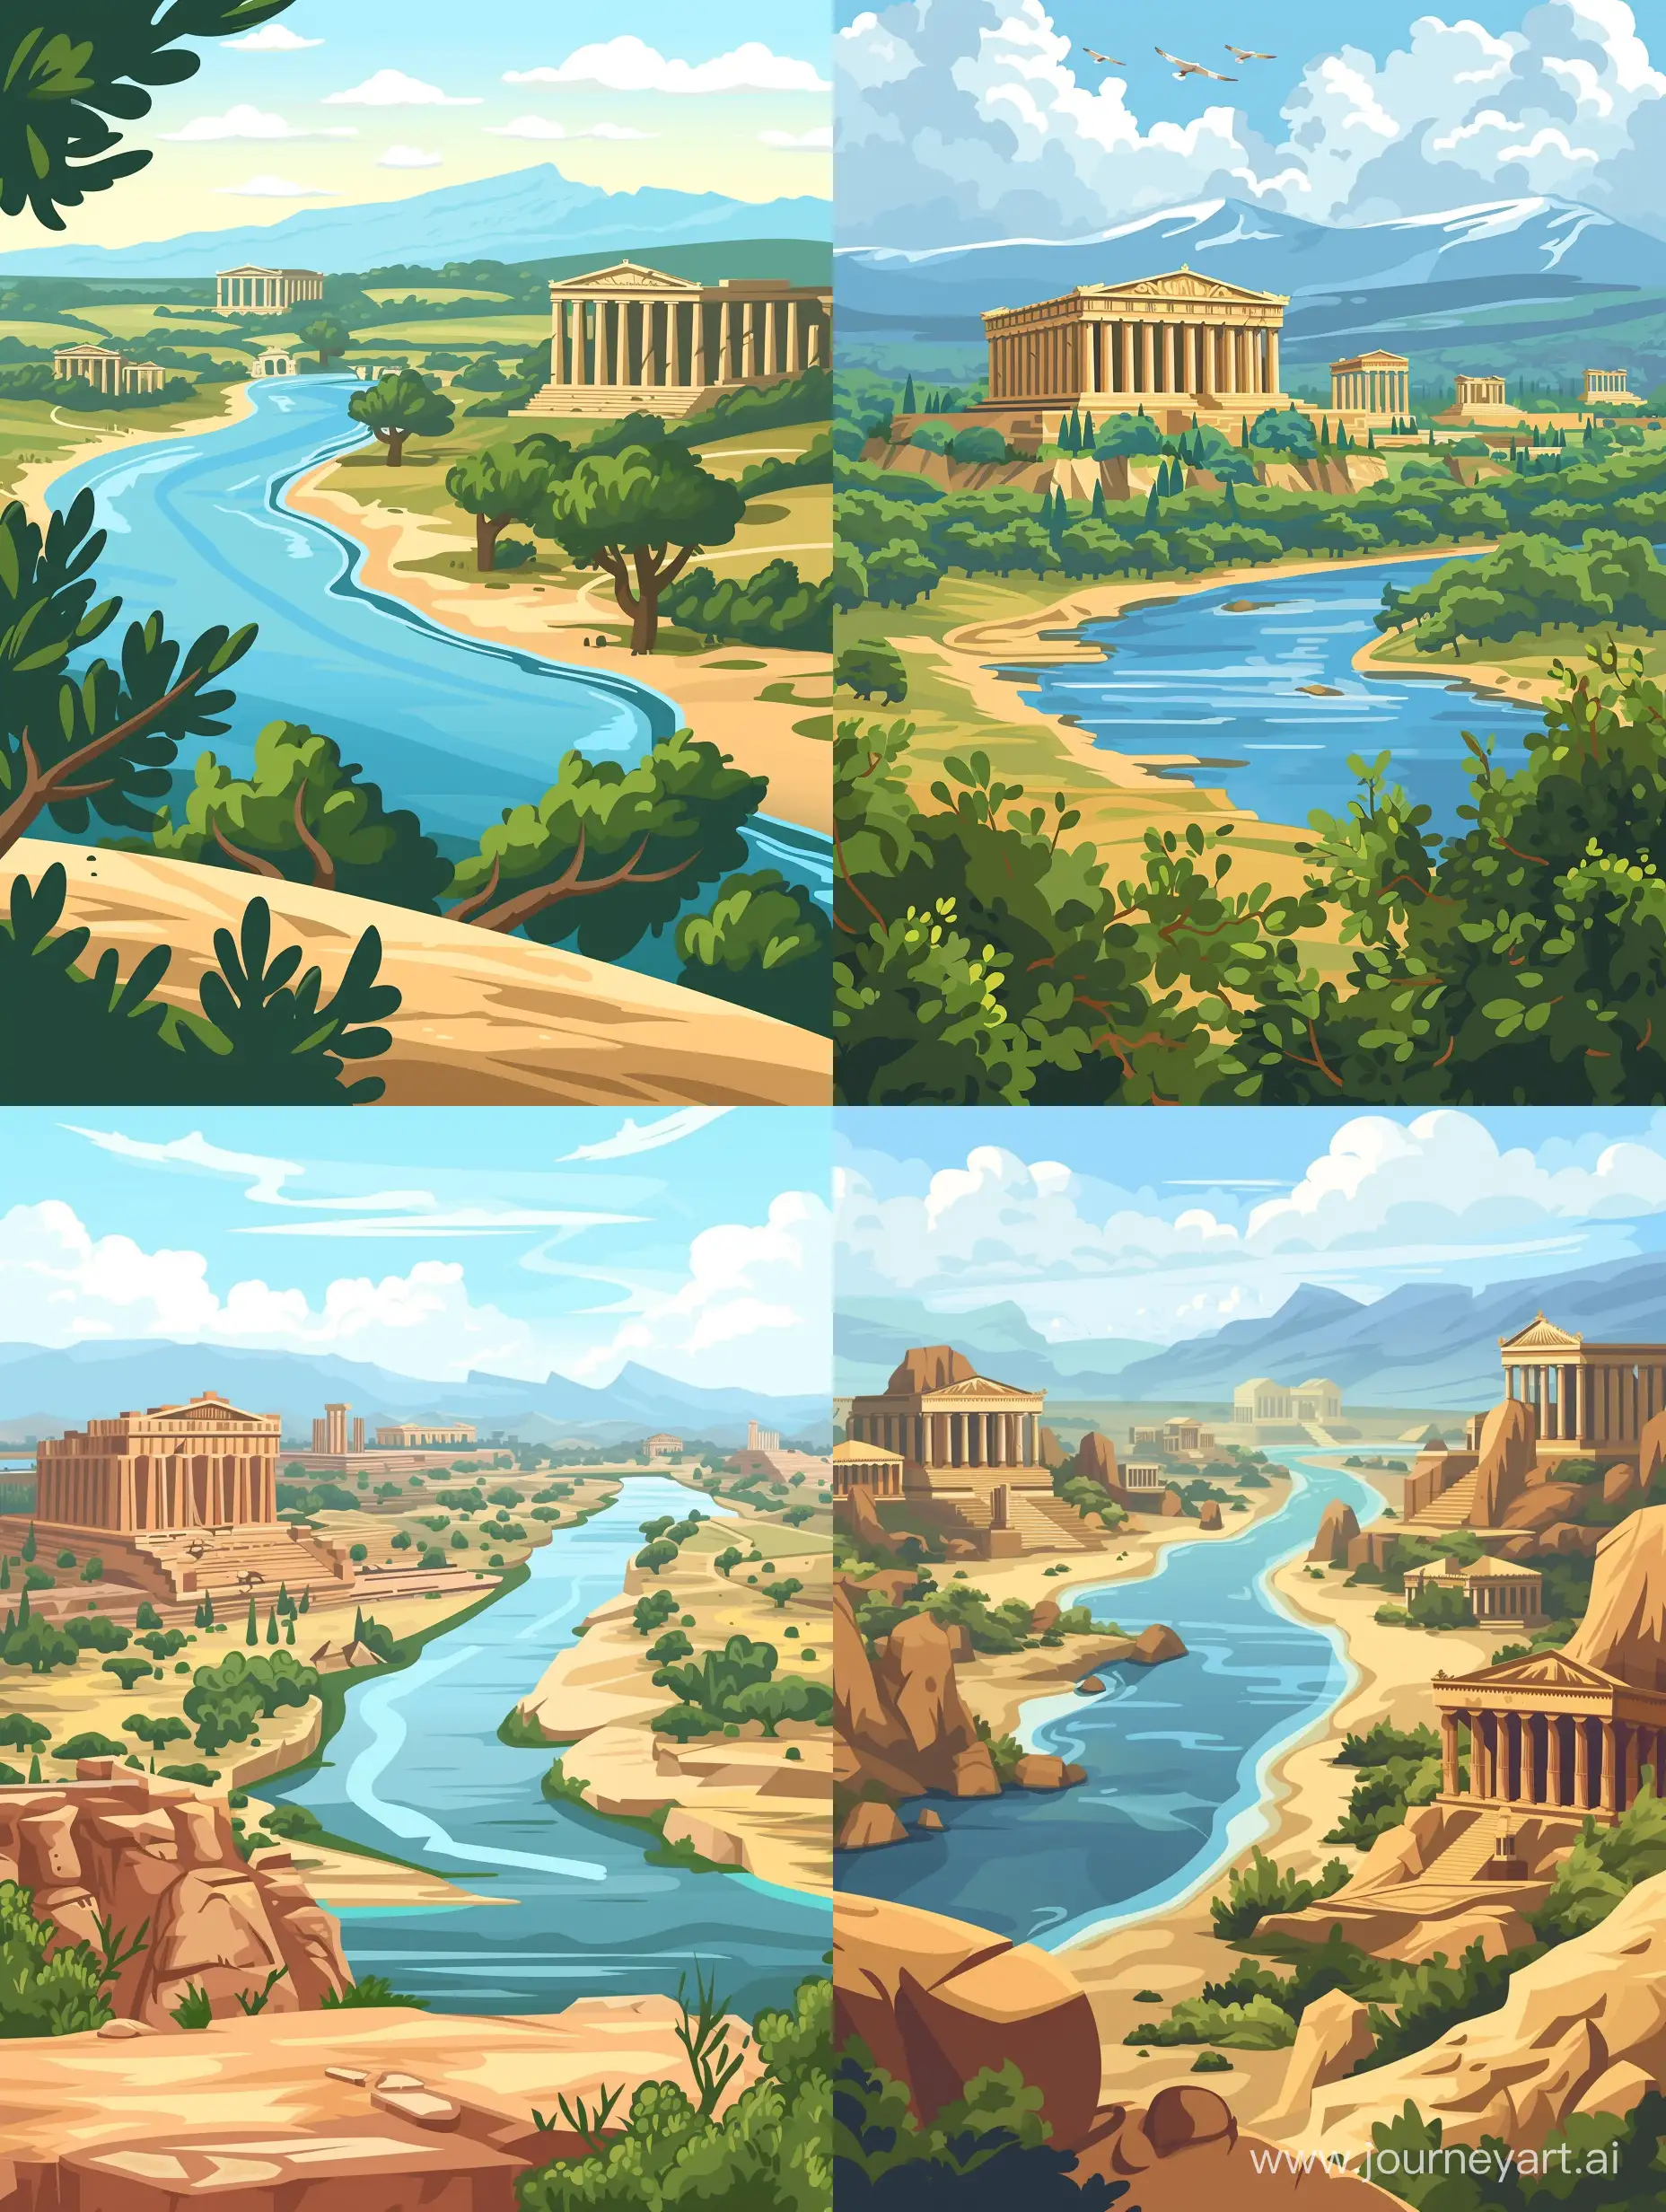 Ancient-Greece-Cartoon-Landscape-with-River-and-Temples